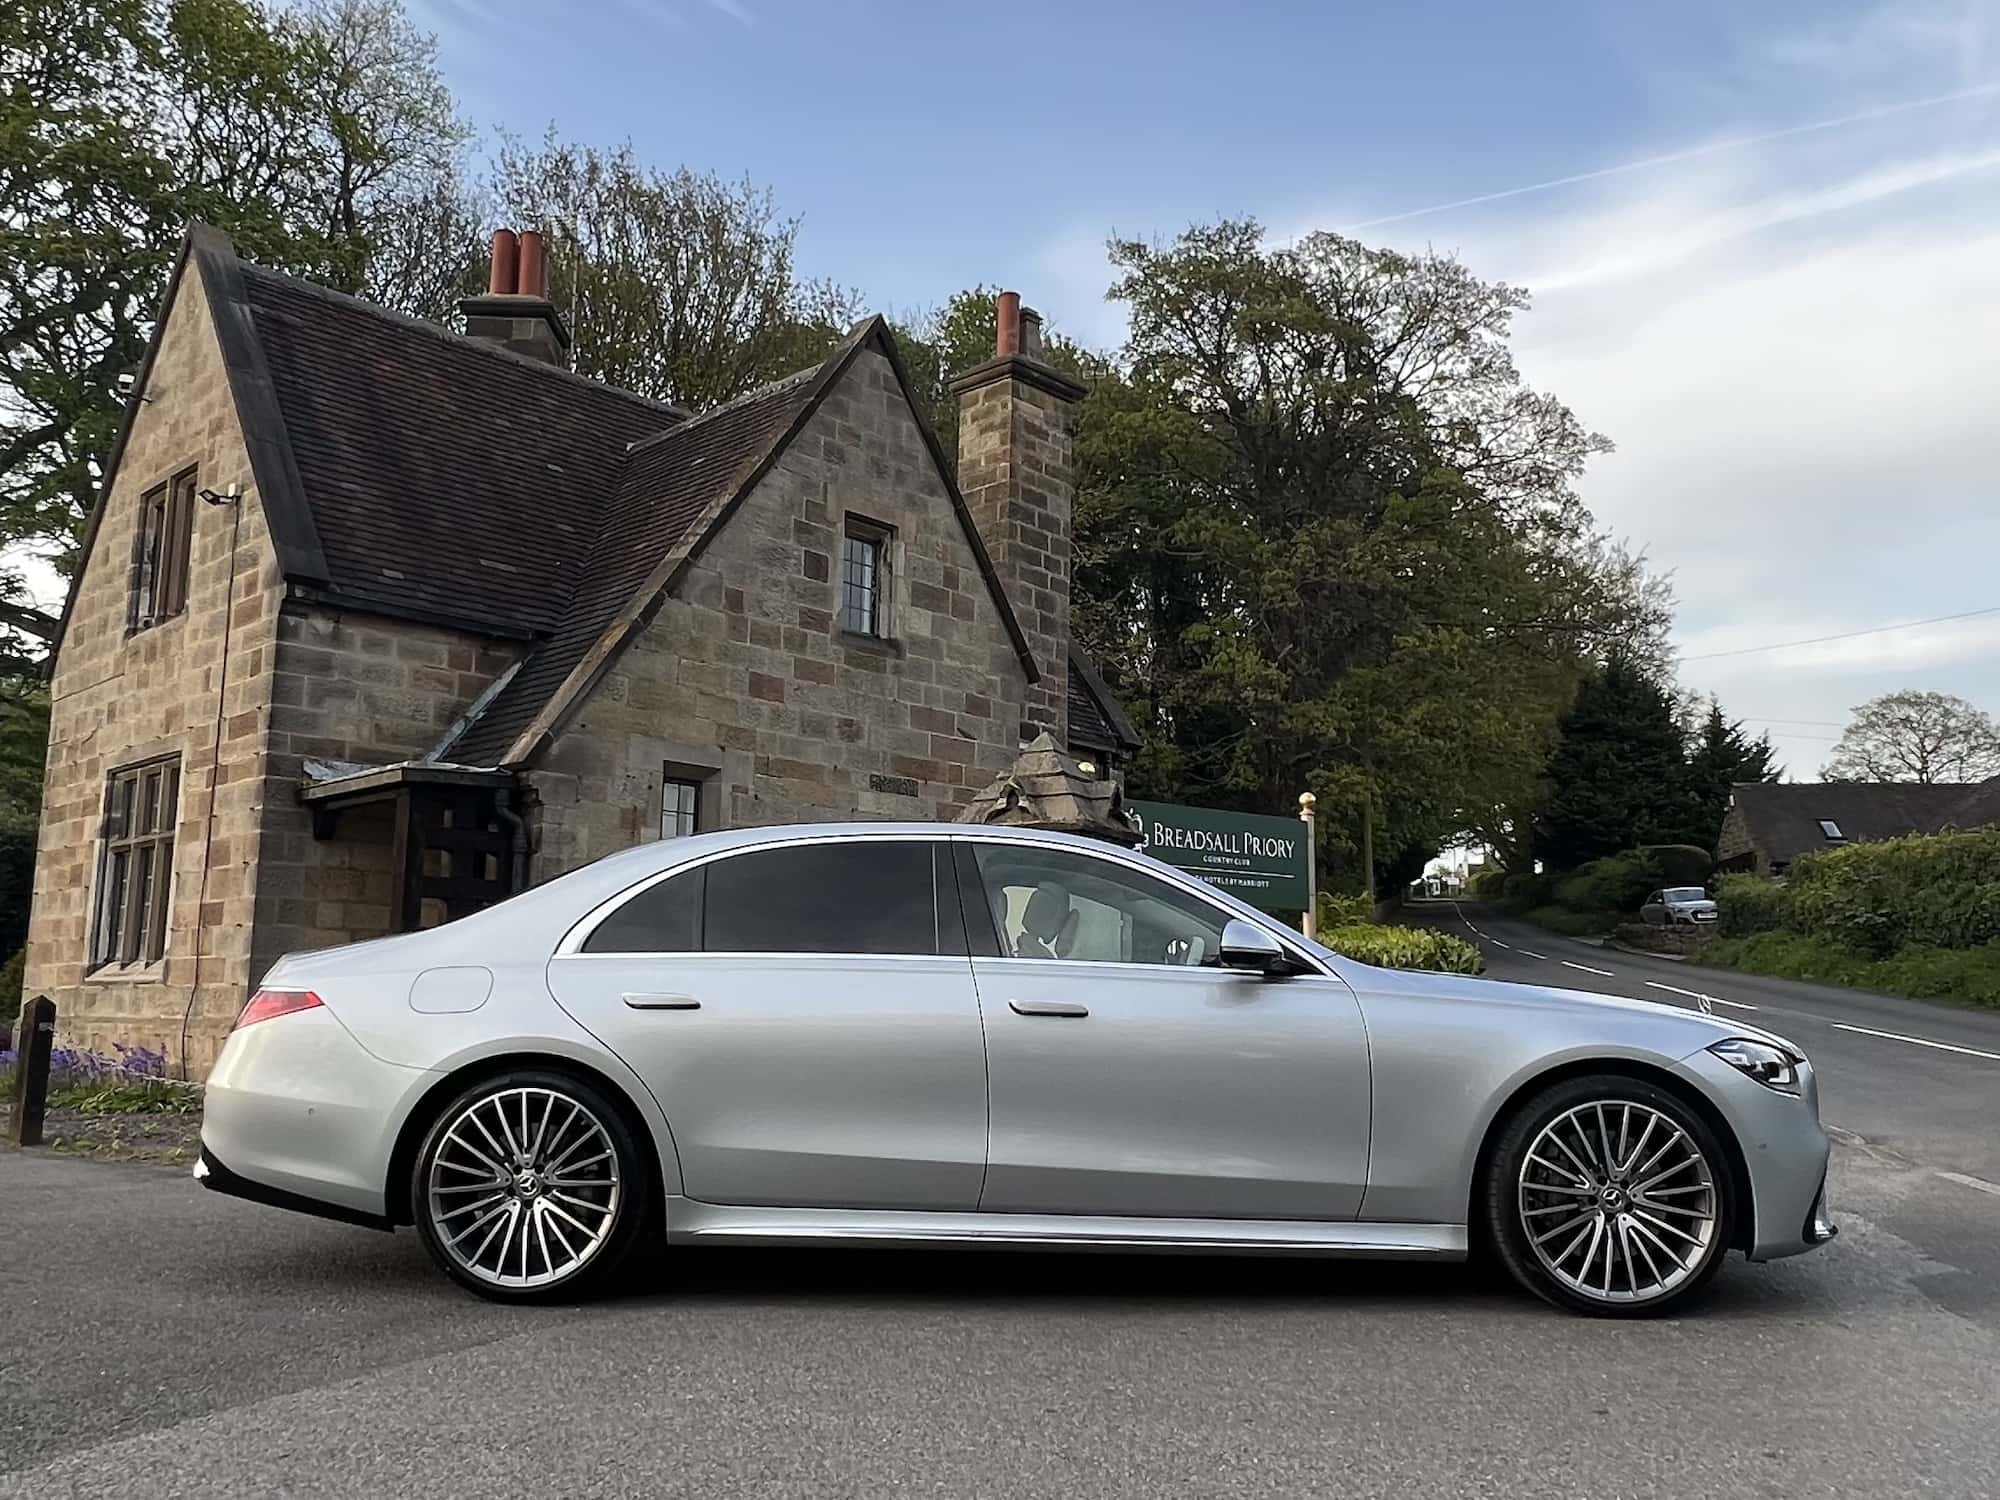 A52 Executive Car Hire Mercedes S Class at Breadsall Priory Hotel